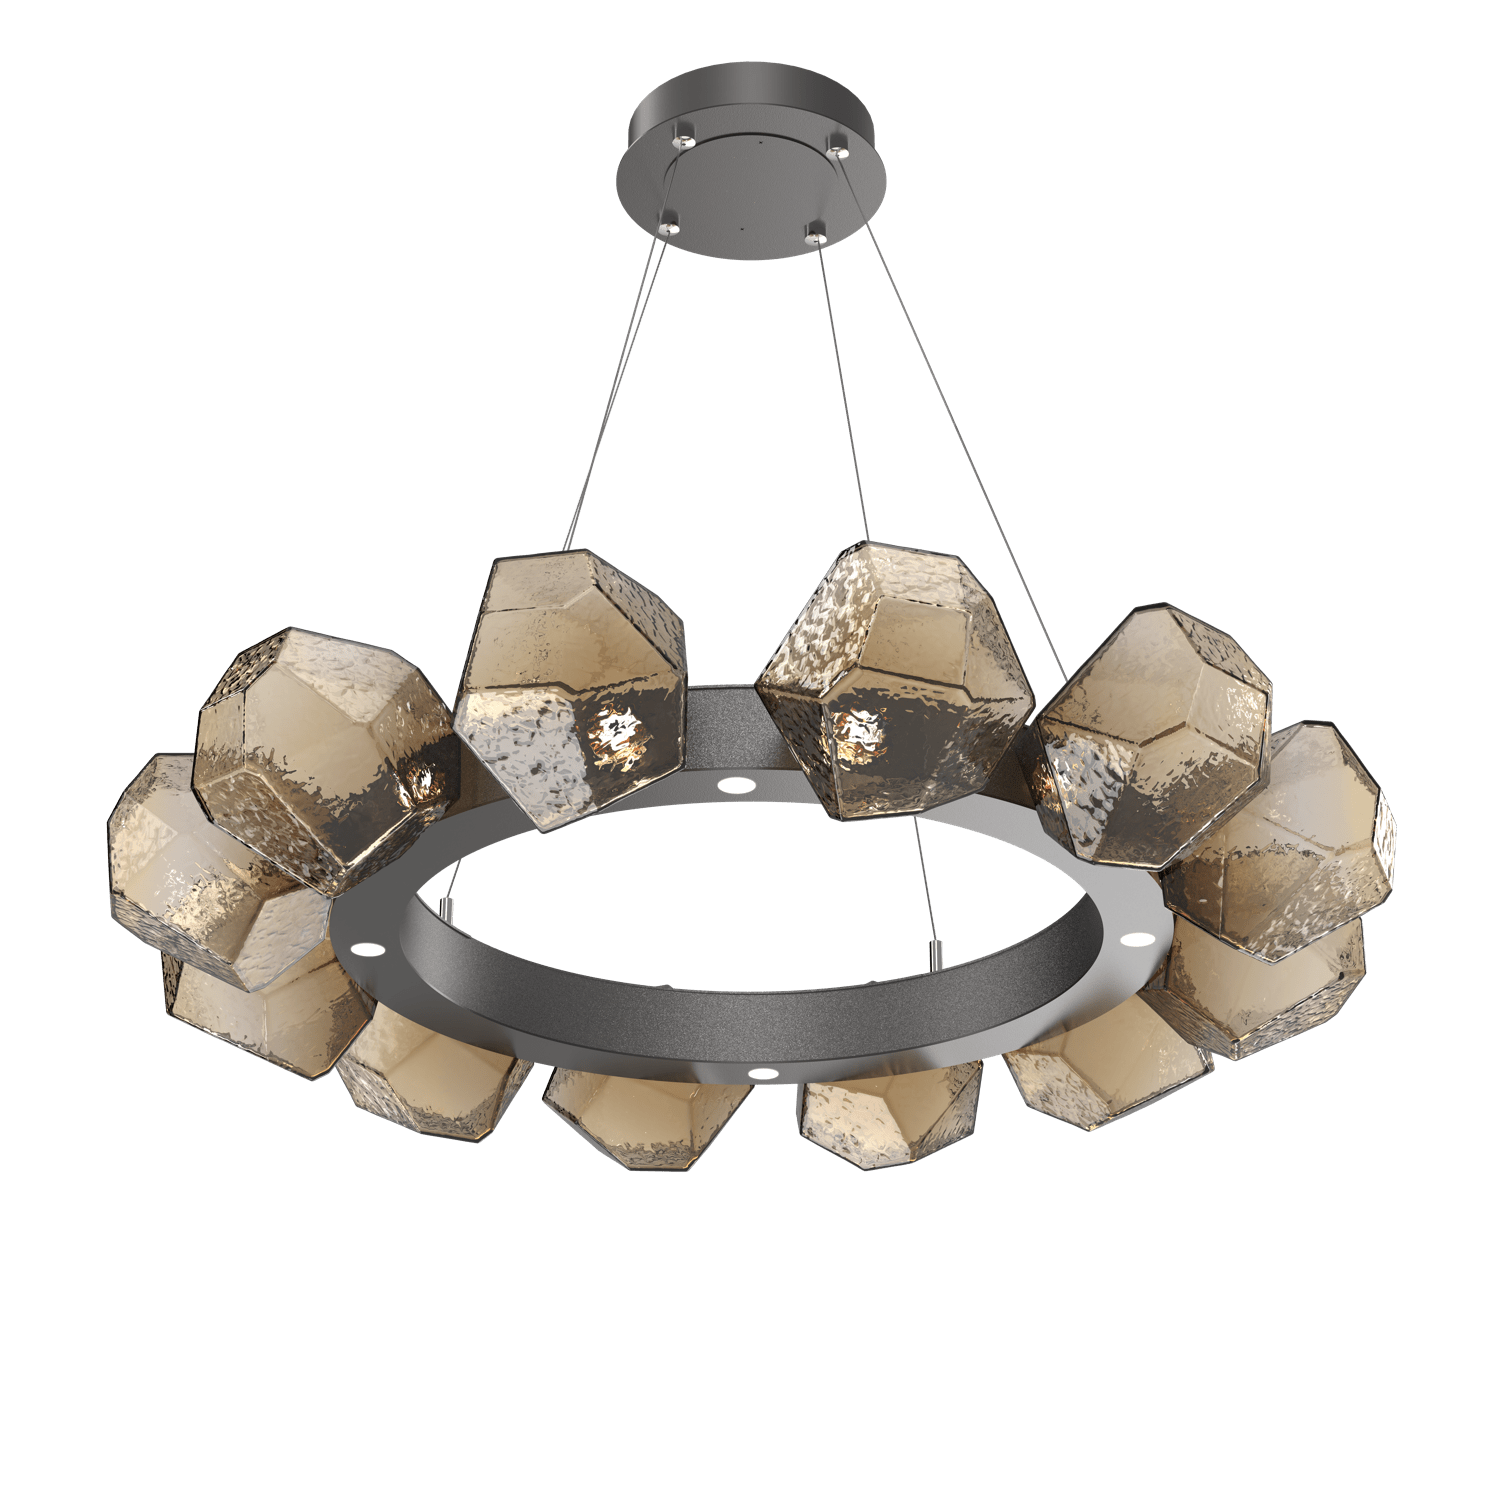 CHB0039-36-GP-B-Hammerton-Studio-Gem-36-inch-radial-ring-chandelier-with-graphite-finish-and-bronze-blown-glass-shades-and-LED-lamping